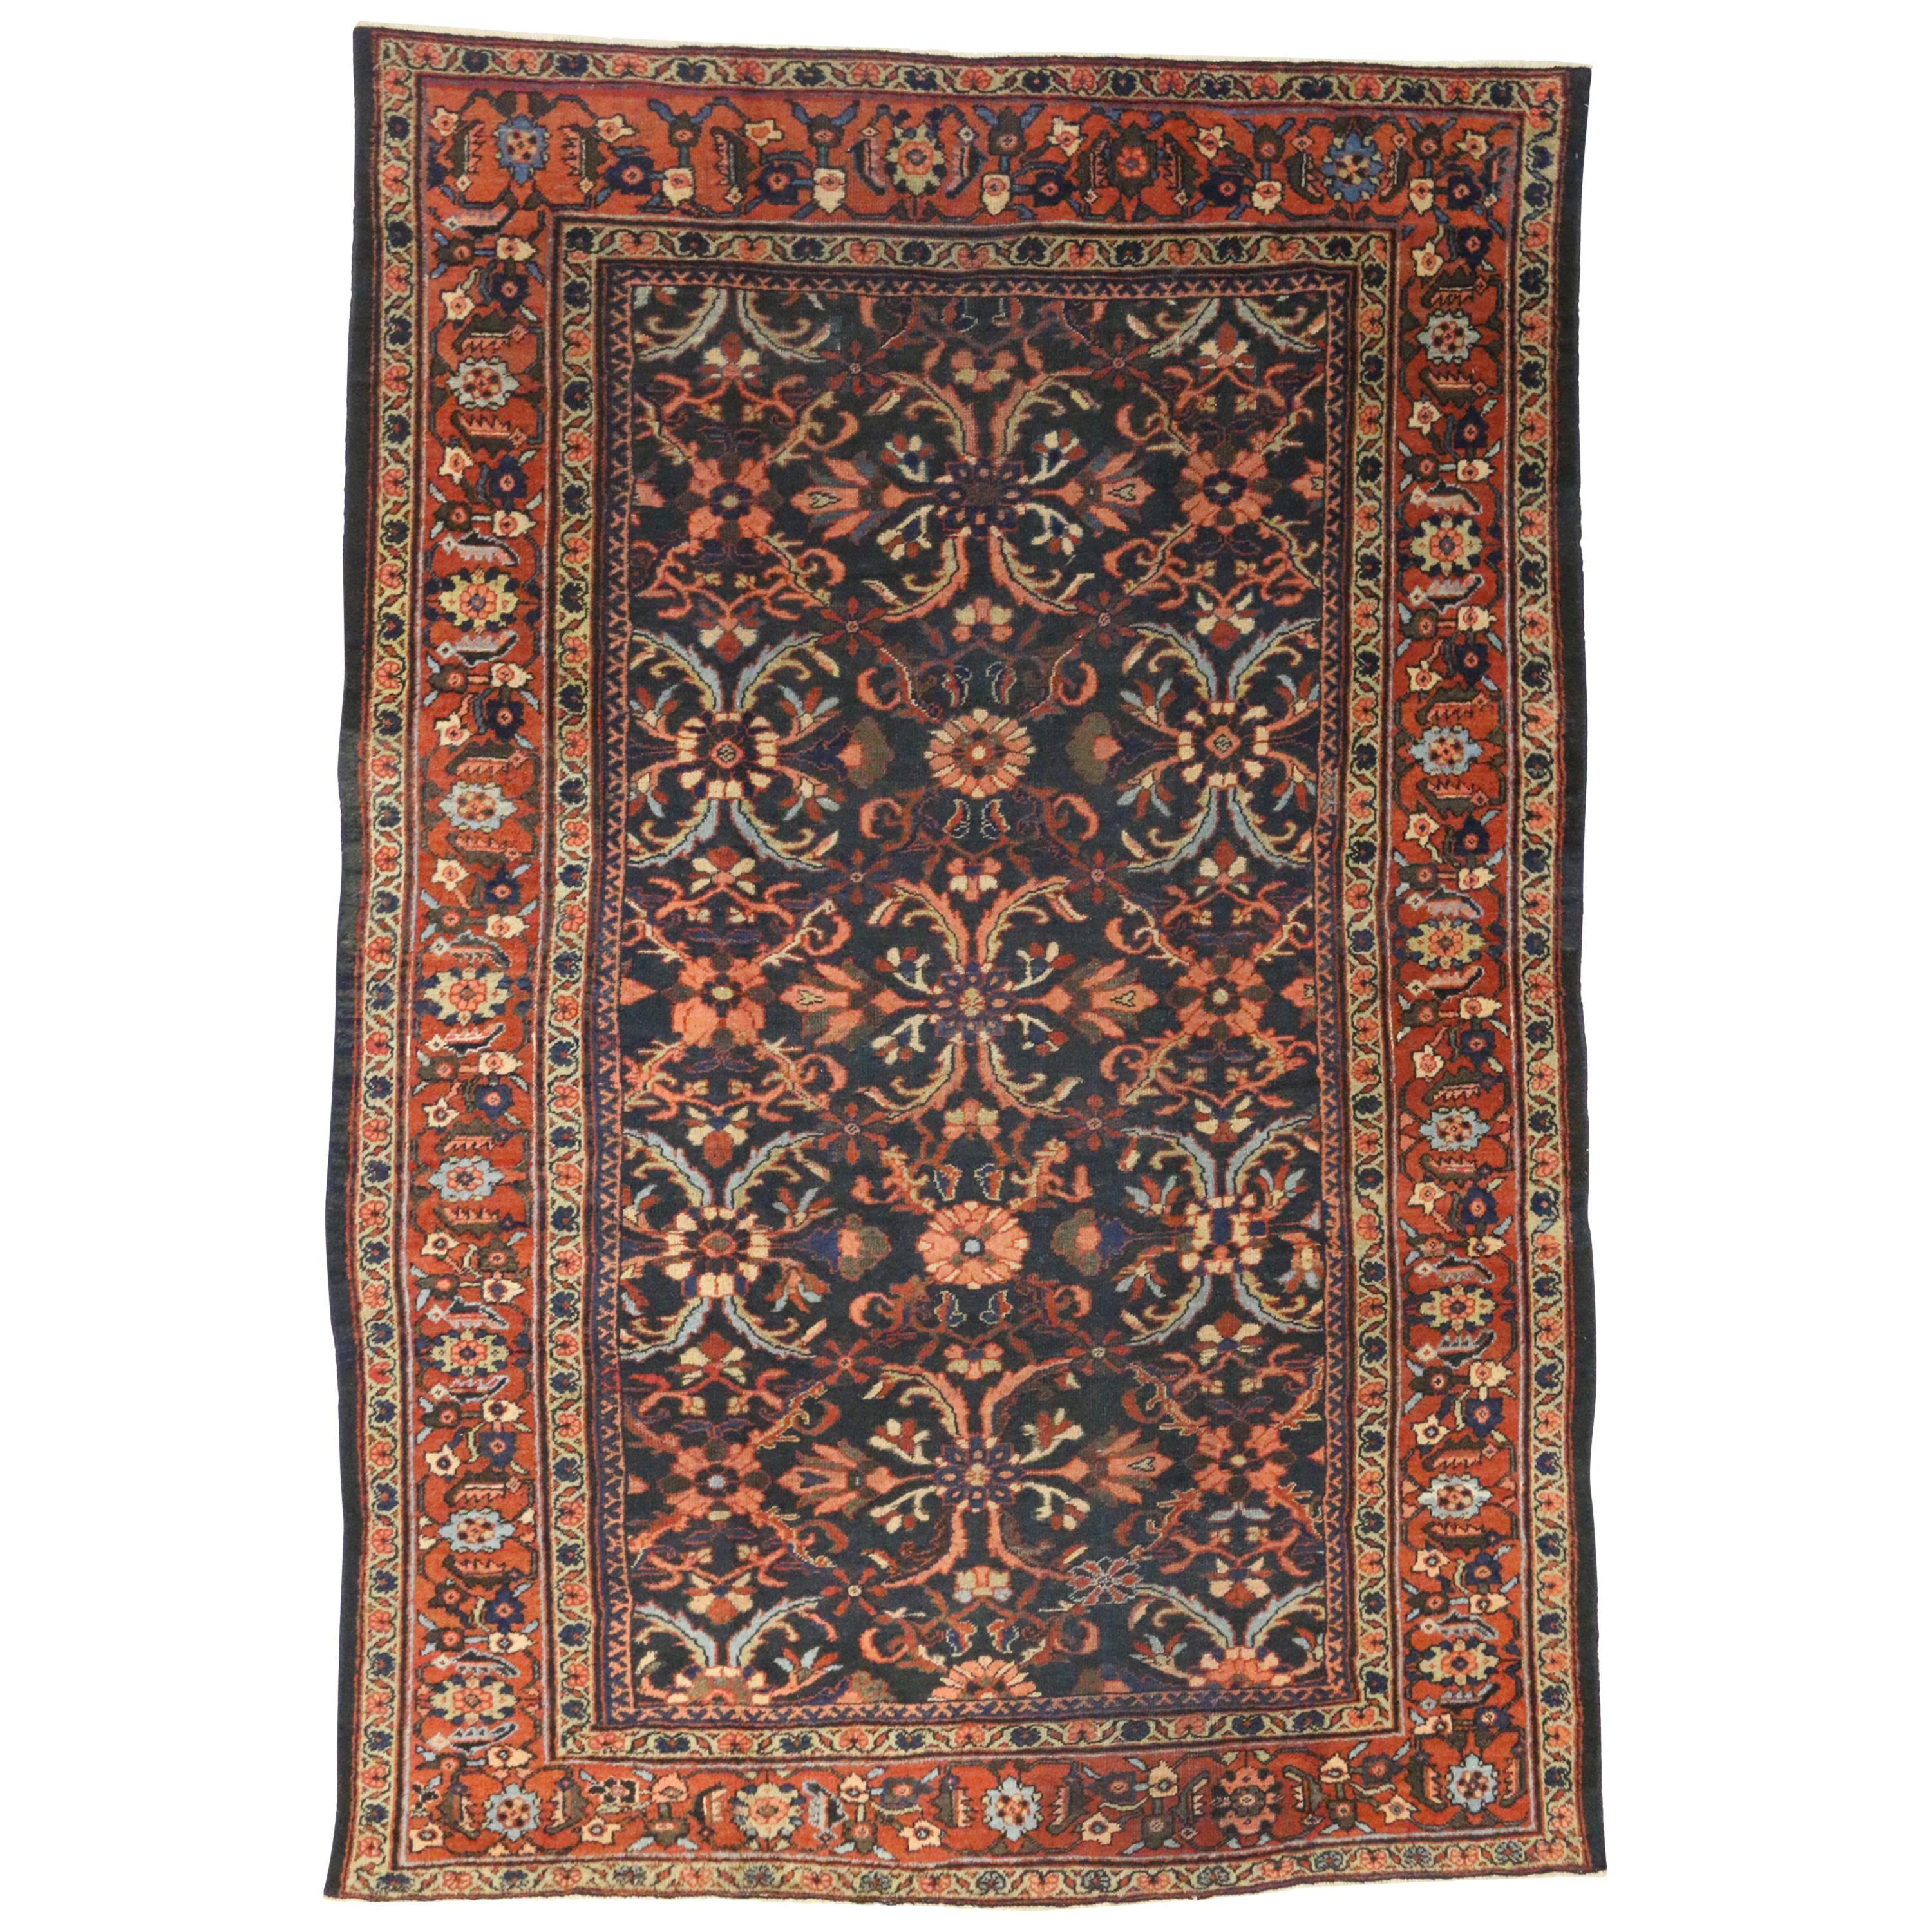 72100 Antique Persian Mahal Rug with Mina Khani Pattern and Arts & Crafts Style 08'07 x 12'08. This hand knotted wool antique Persian Mahal rug features a lively all-over floral lattice pattern composed of a repeating large-scale Mina Khani design